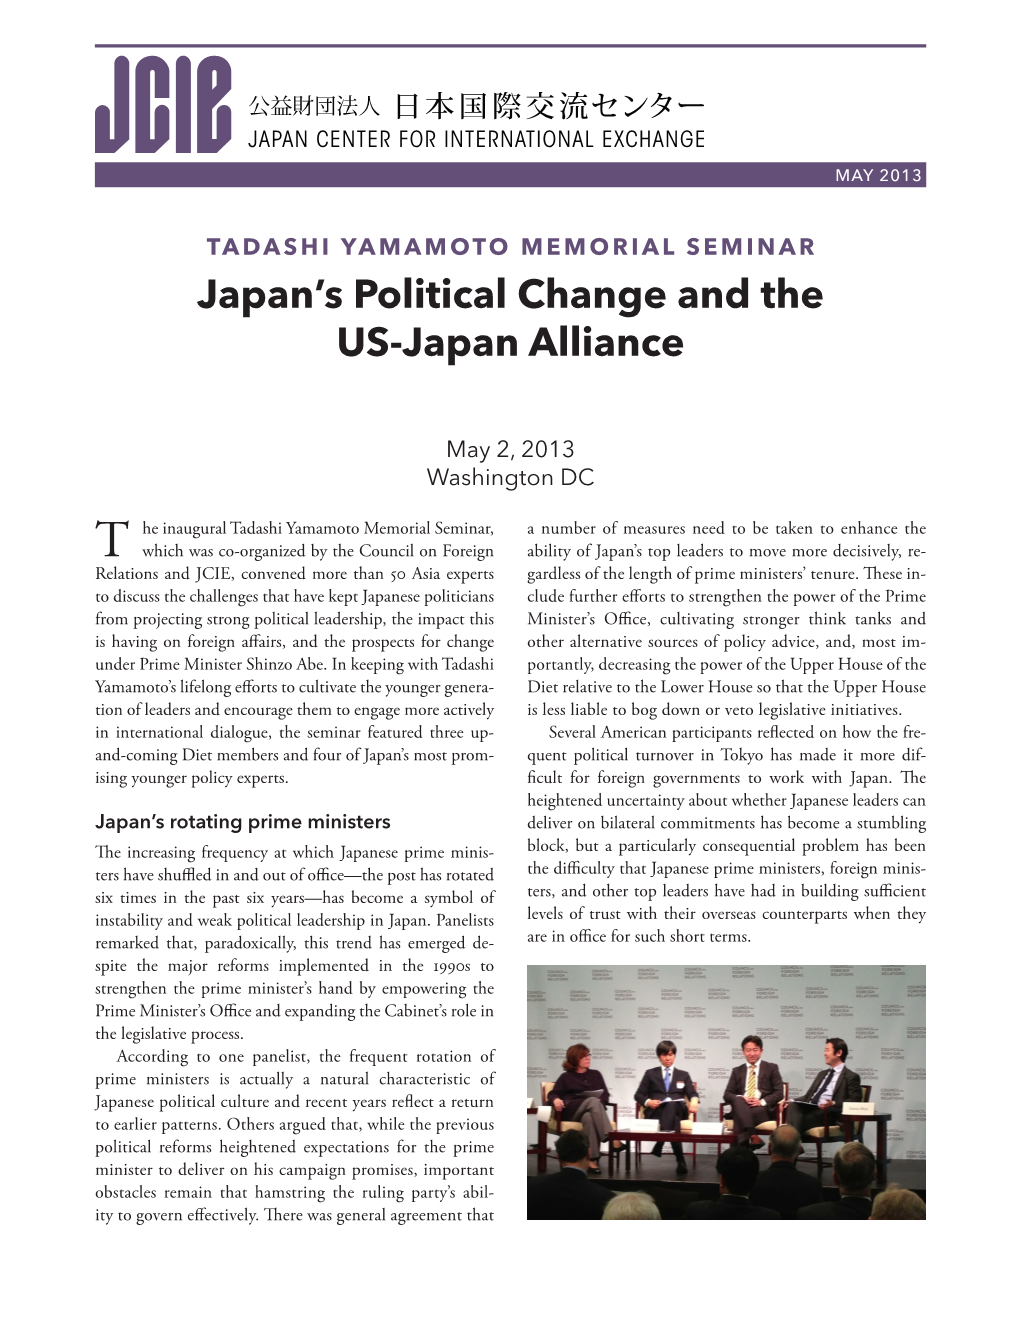 Japan's Political Change and the US-Japan Alliance